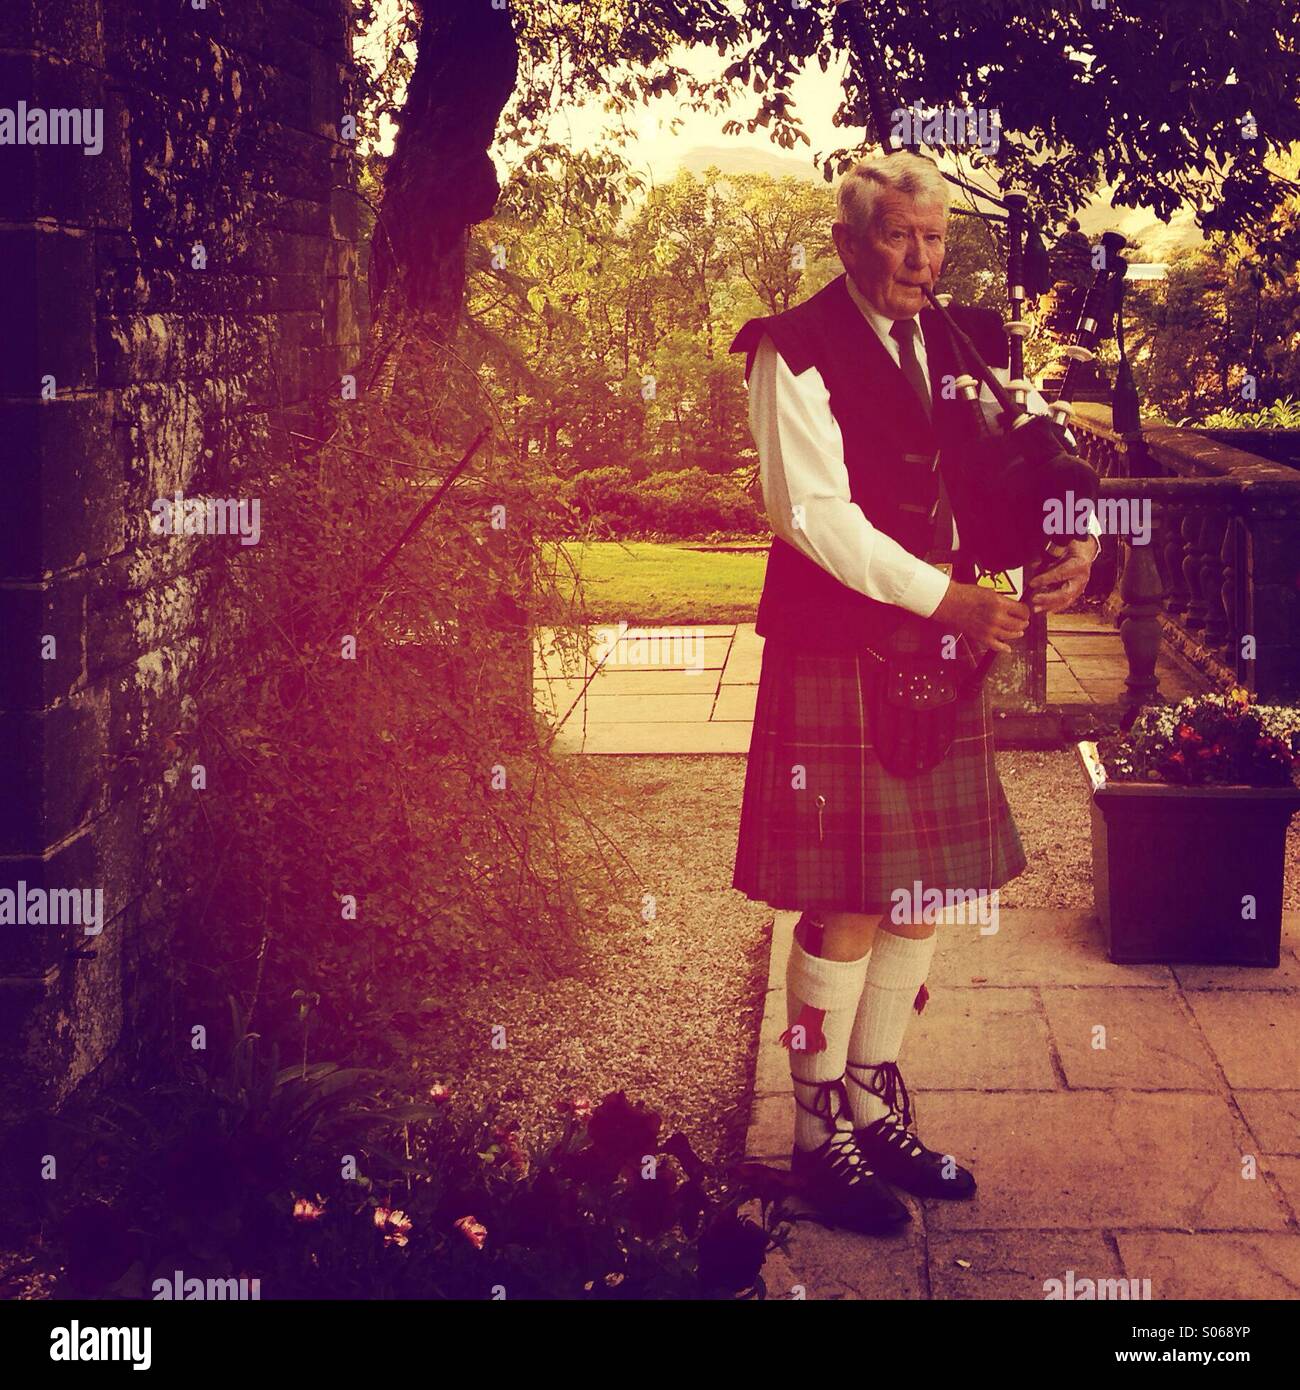 Piper playing bagpipes in Scottish wedding venue Stock Photo